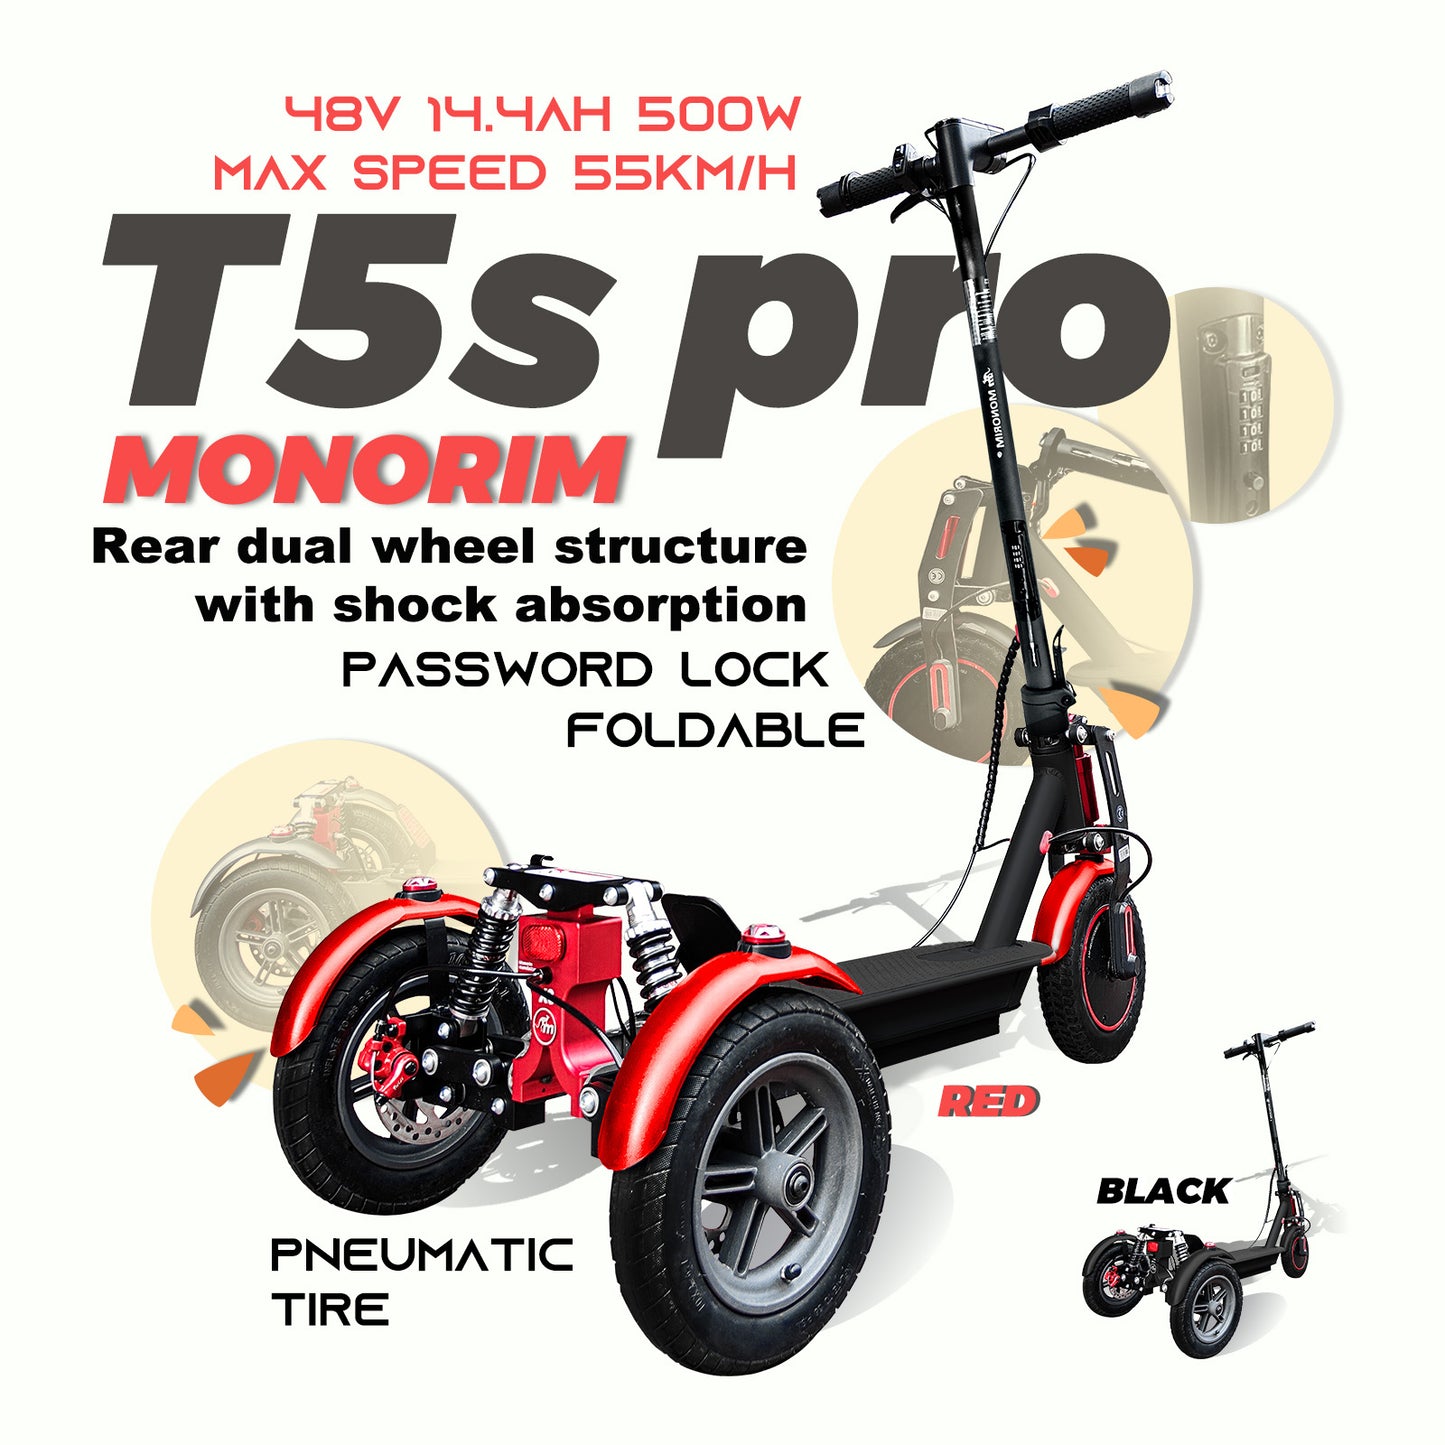 （preorder ）🥇Monorim T5s pro x3wheel support for carrying kit 48v 500w 14.4ah 55km/h 🔥